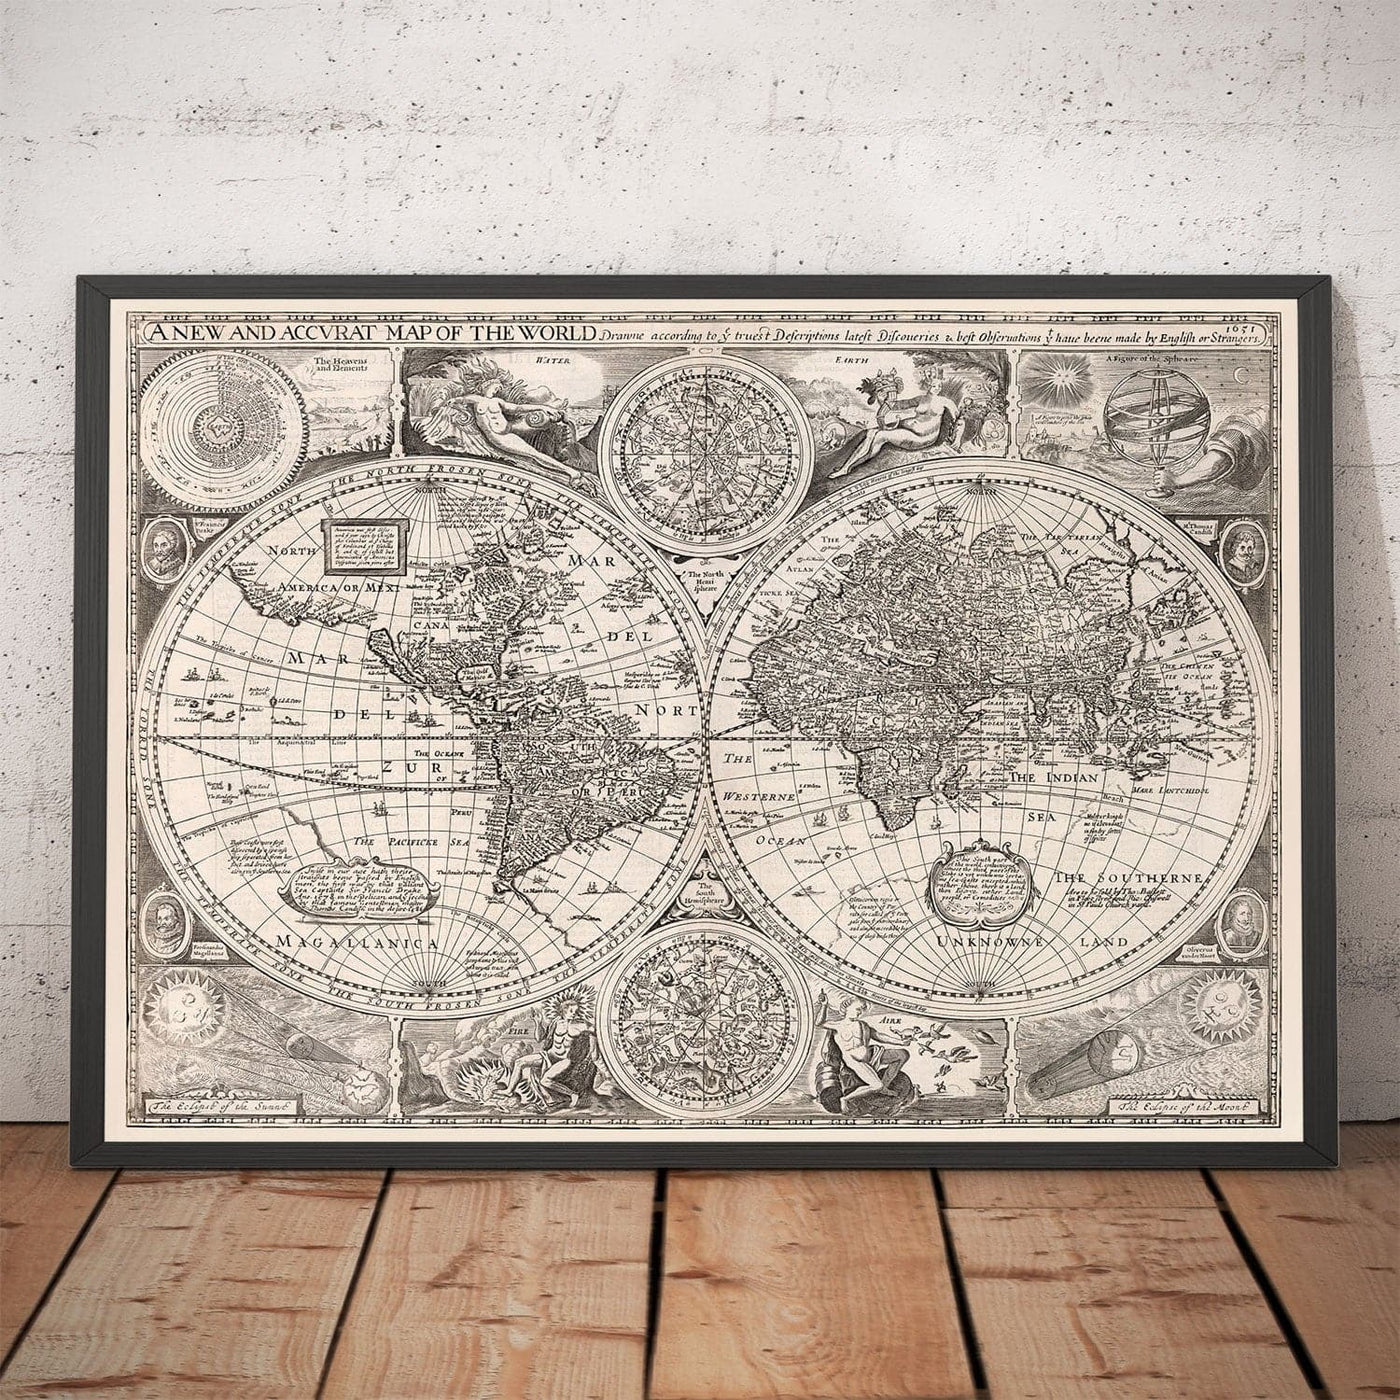 Old World Atlas Map from 1651 by John Speed - Rare Monochrome Copperplate Wall Chart